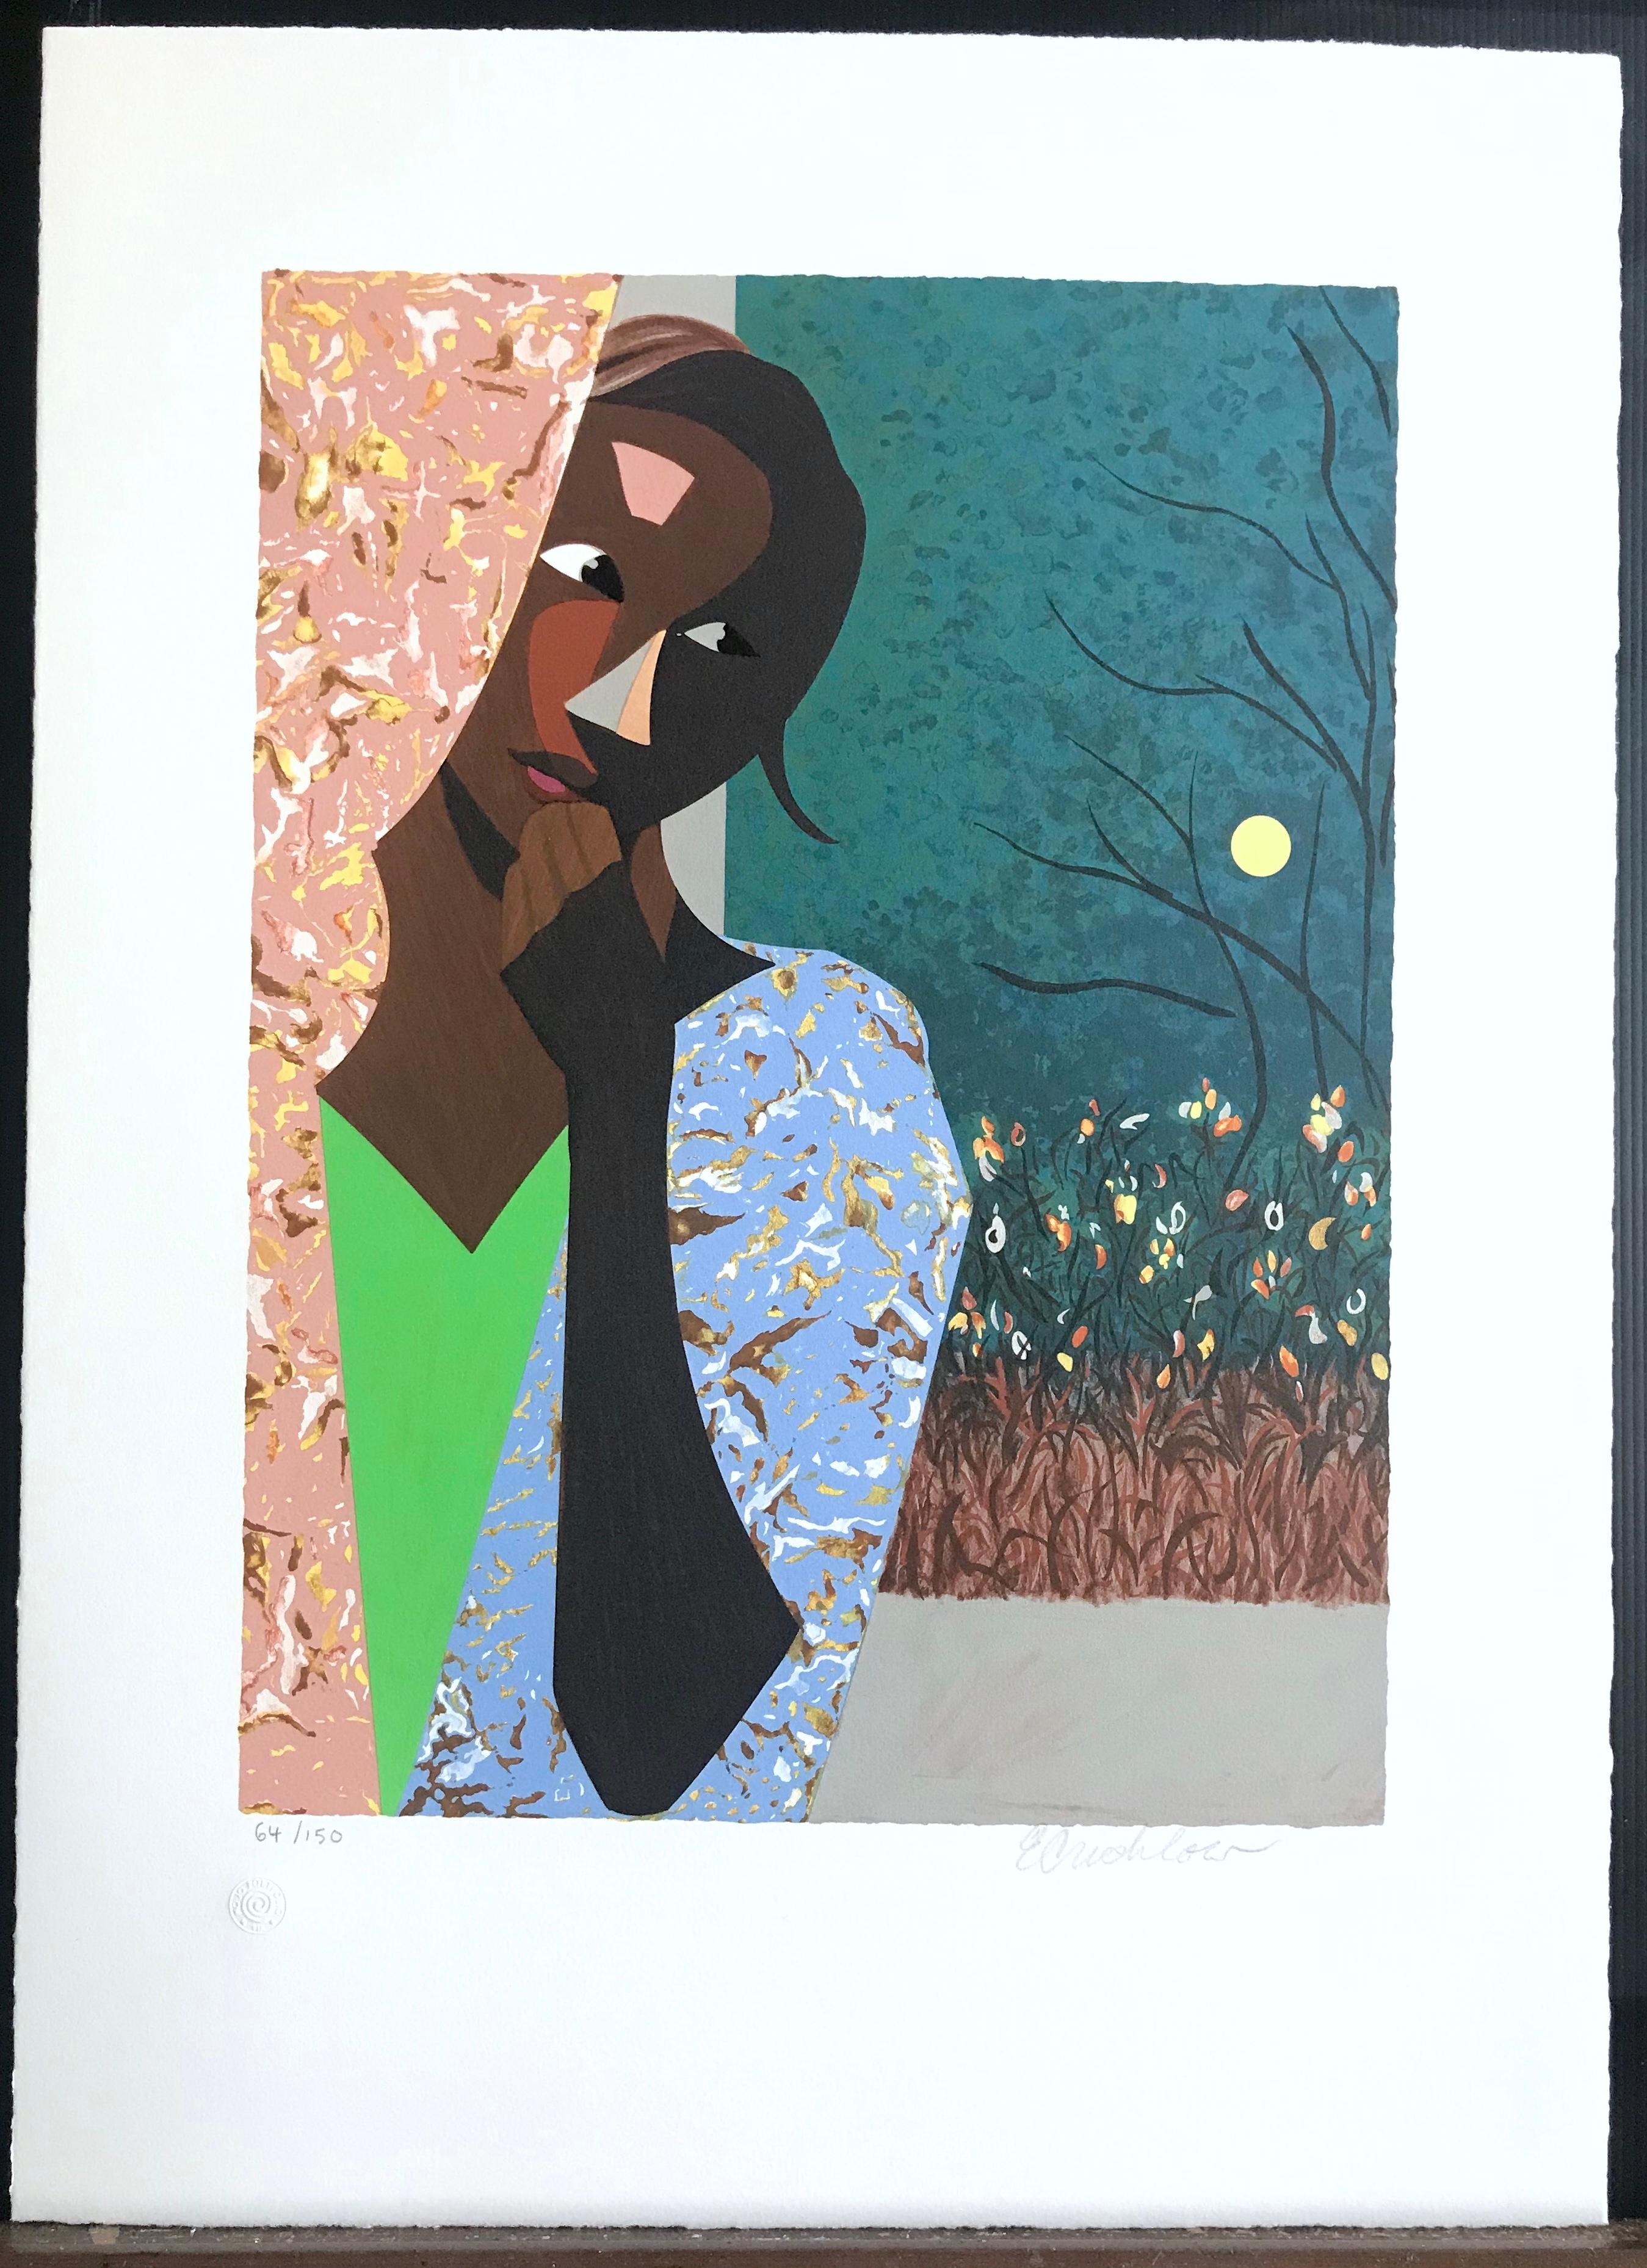 EVENING THOUGHTS Signed Lithograph, Young Black Woman, Color Collage Portrait - Contemporary Print by Ernest Crichlow